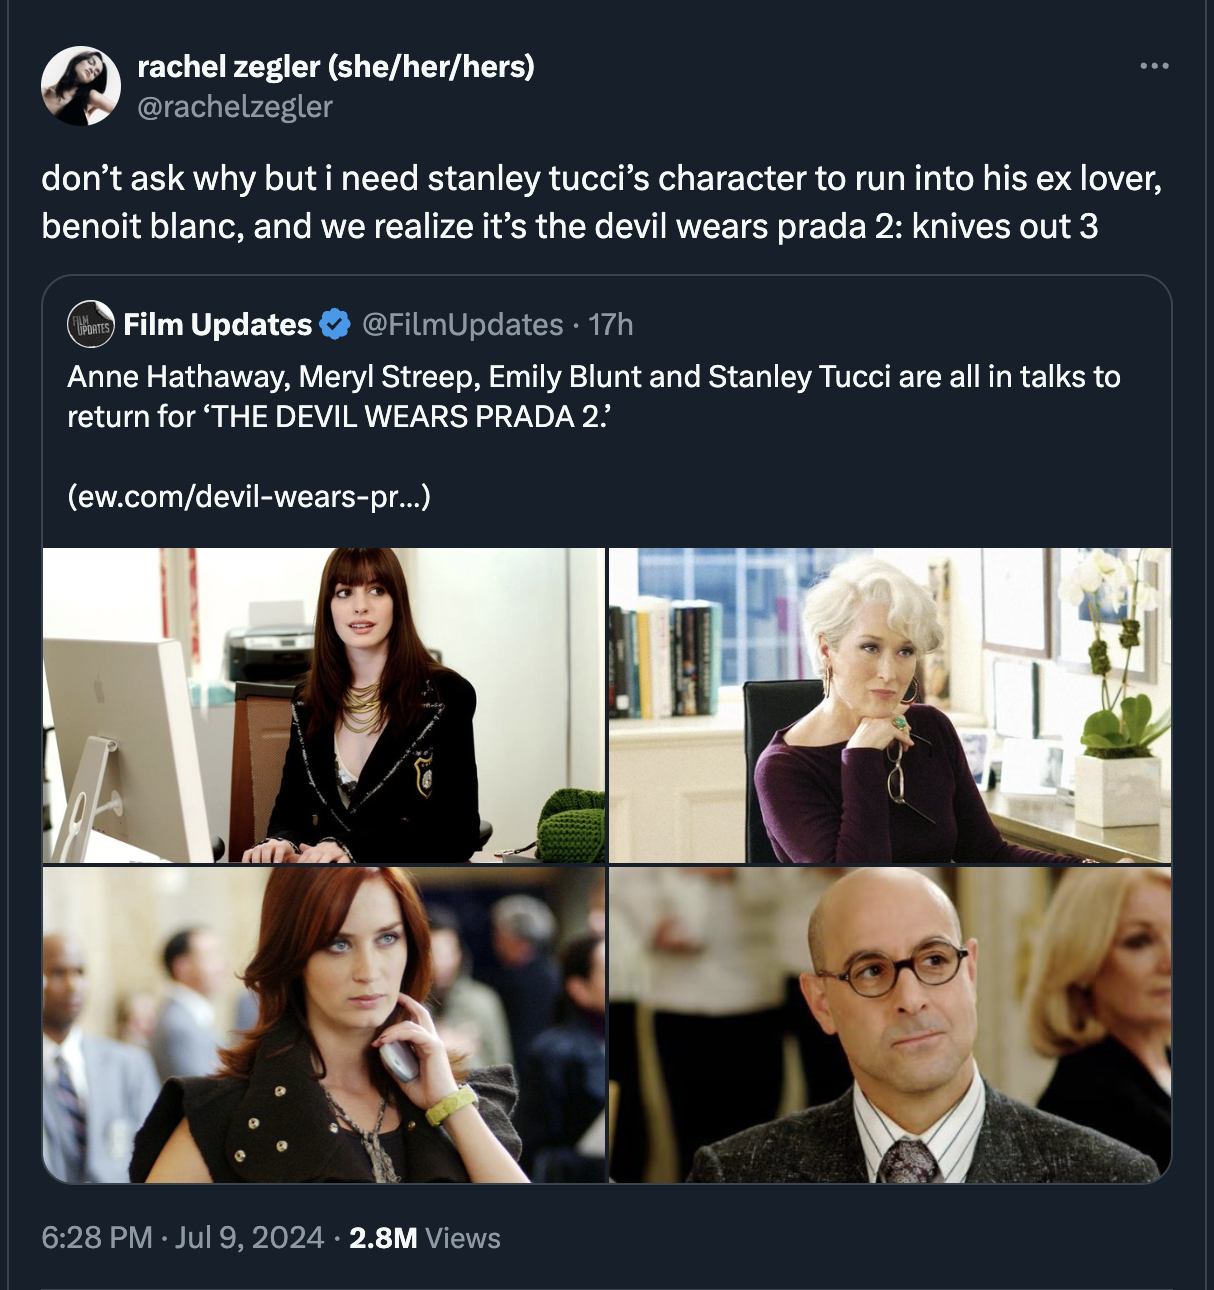 collage - rachel zegler sheherhers don't ask why but i need stanley tucci's character to run into his ex lover, benoit blanc, and we realize it's the devil wears prada 2 knives out 3 Film Updates 17h Anne Hathaway, Meryl Streep, Emily Blunt and Stanley Tu